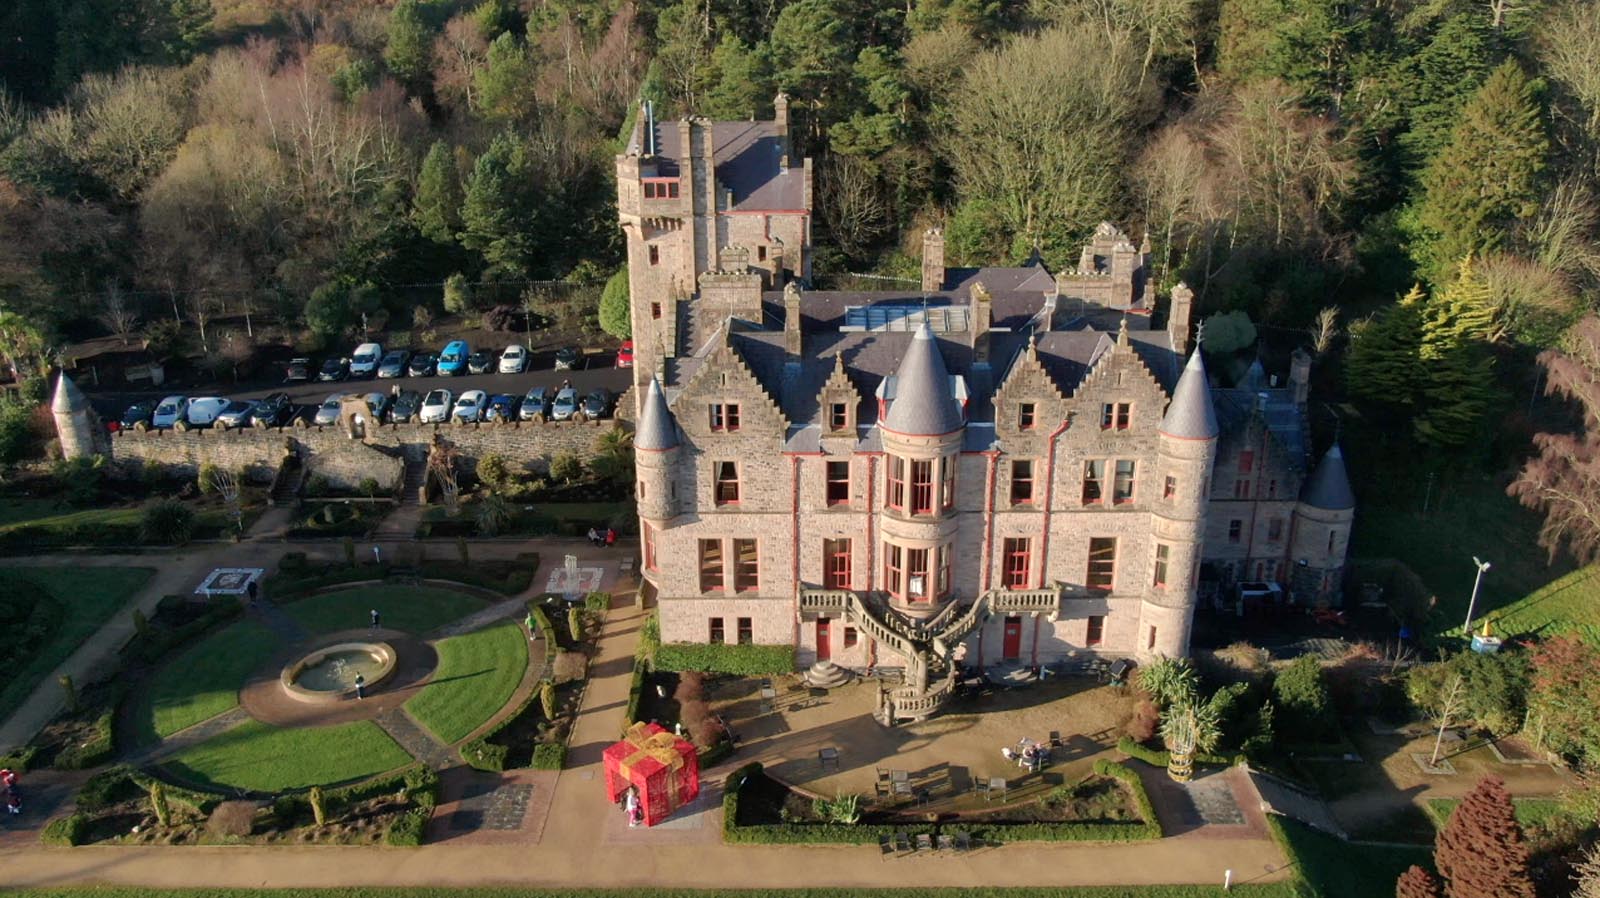 Aerial drone photography and video production services Dublin and Ireland portfolio - screenshot 5 of Belfast Castle 2 video